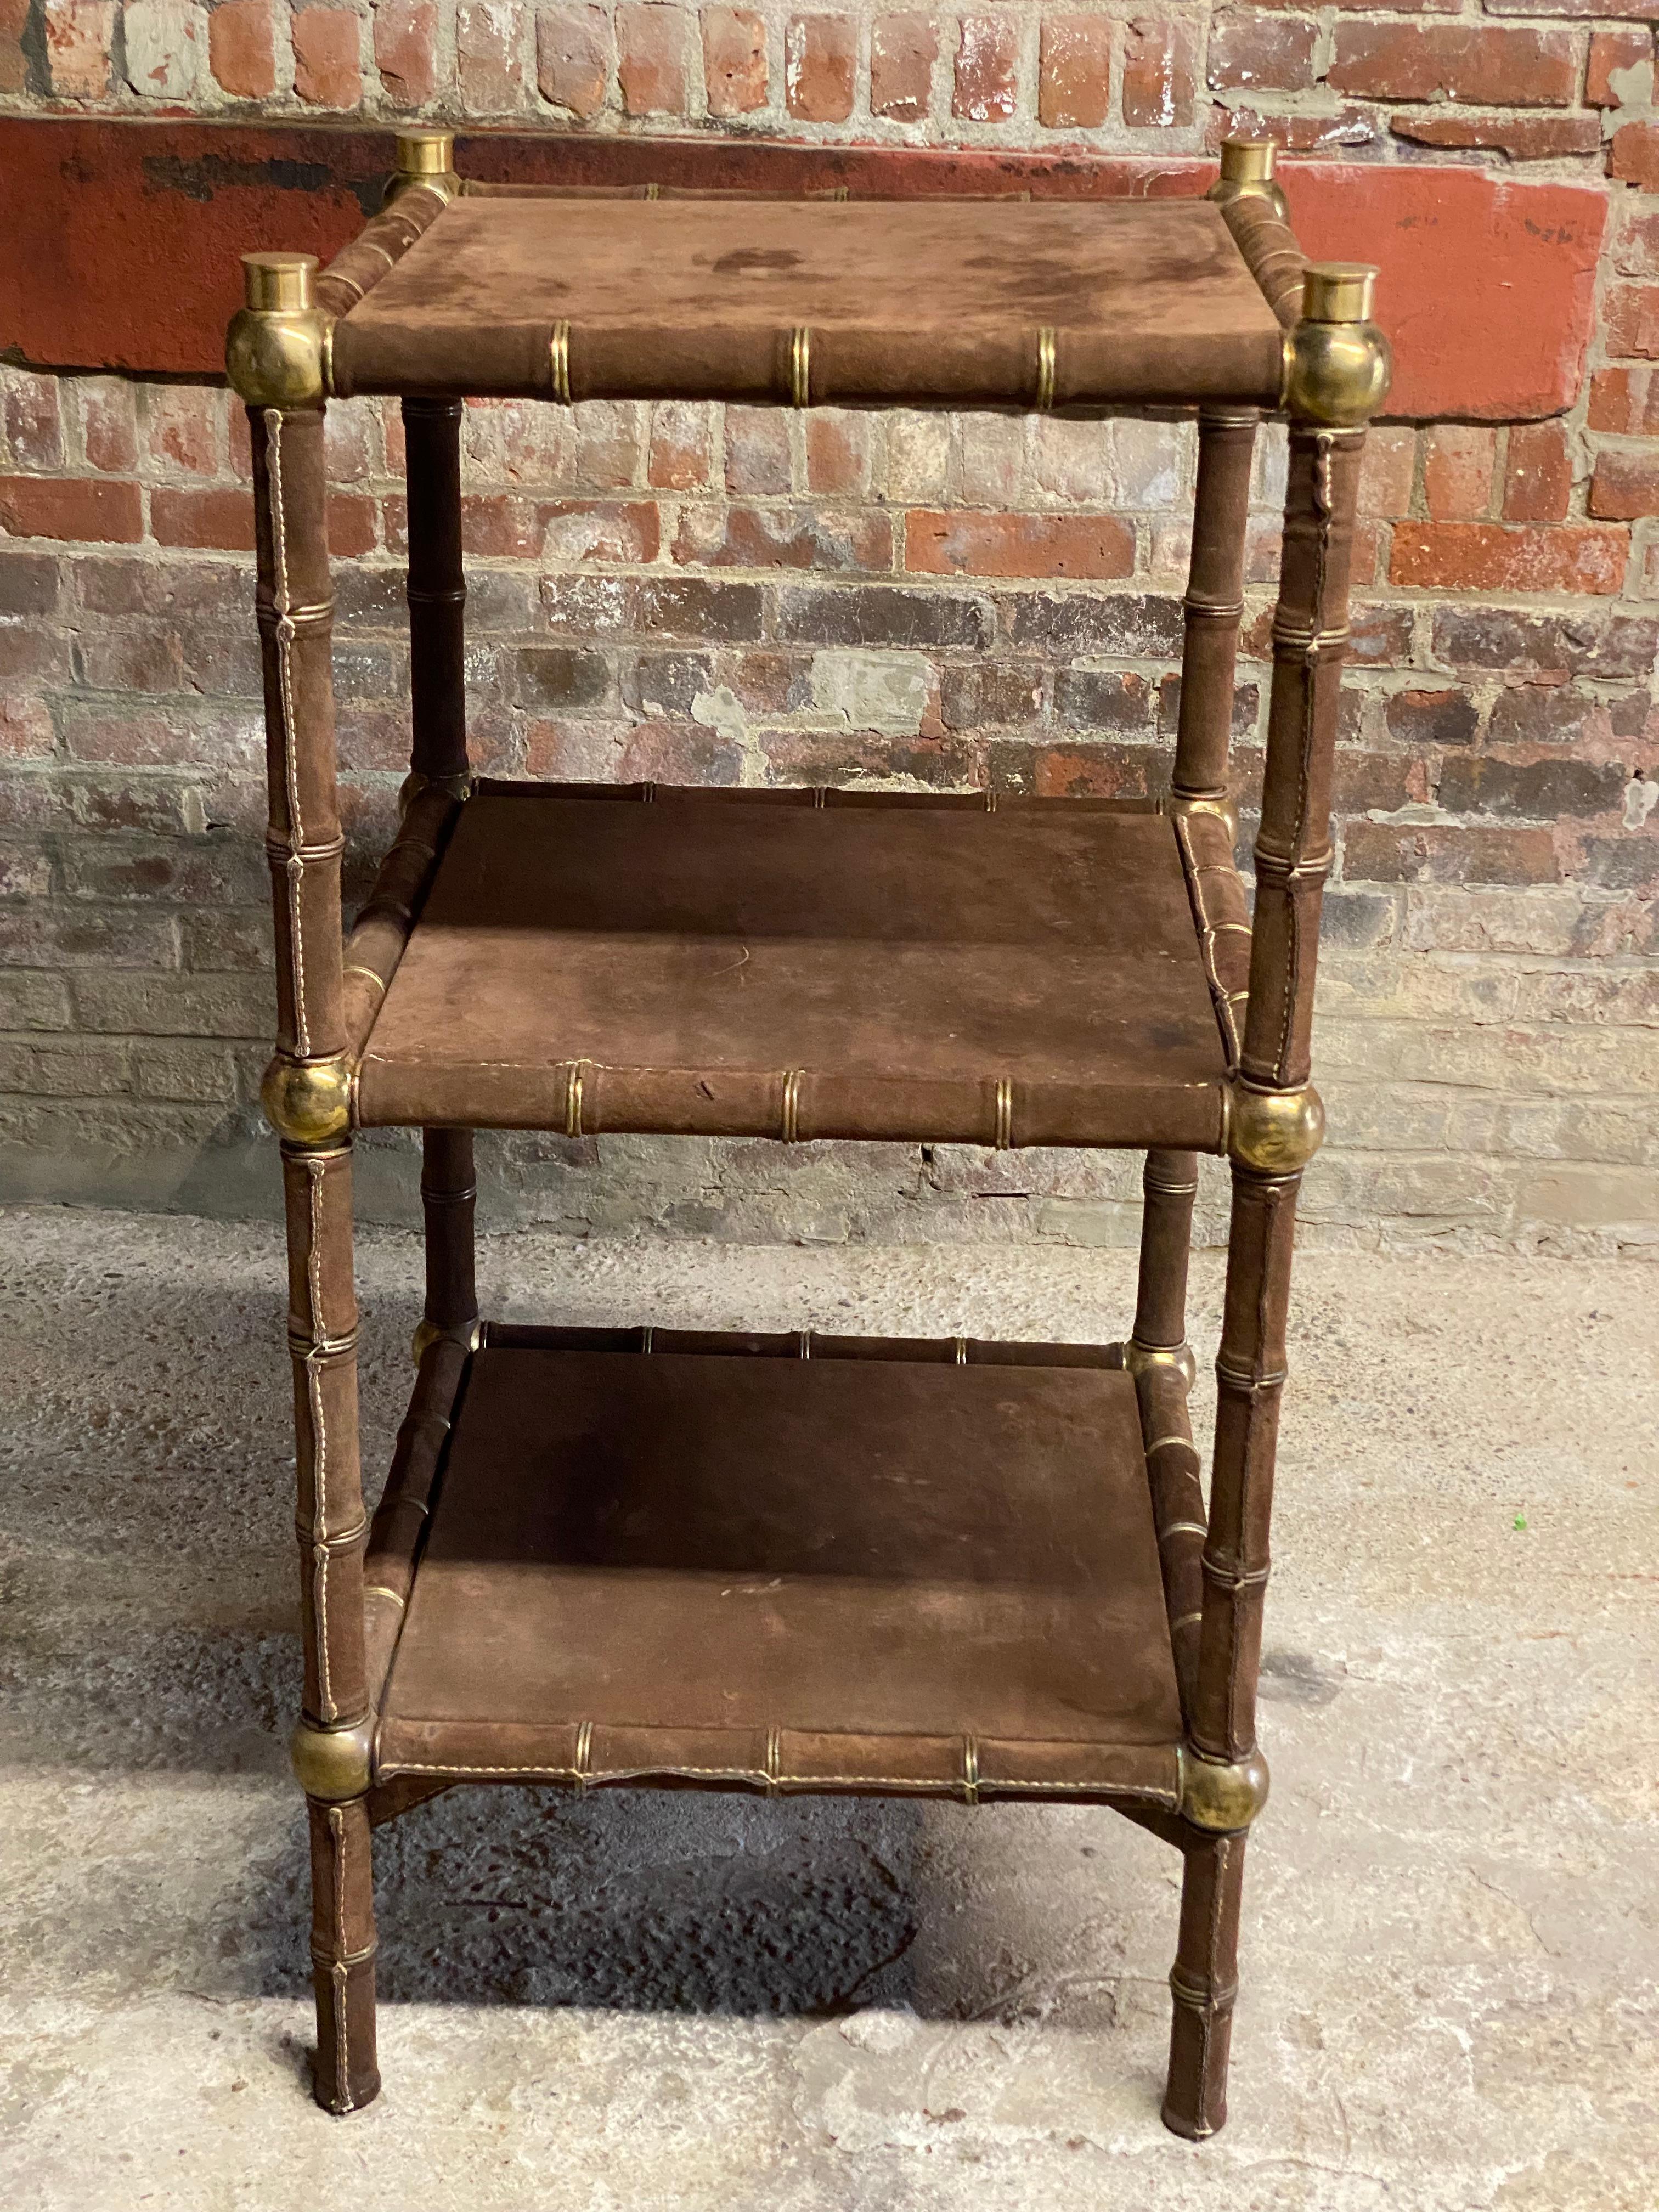 A spectacular three tiered suede and brass shelving unit. Wrapped brown suede (Nubuck?) shelves with brass caps and rings. Circa 1975. This Post-Modern style is reminiscent of great clothing designers of the 1970s producing some fantastic decorative